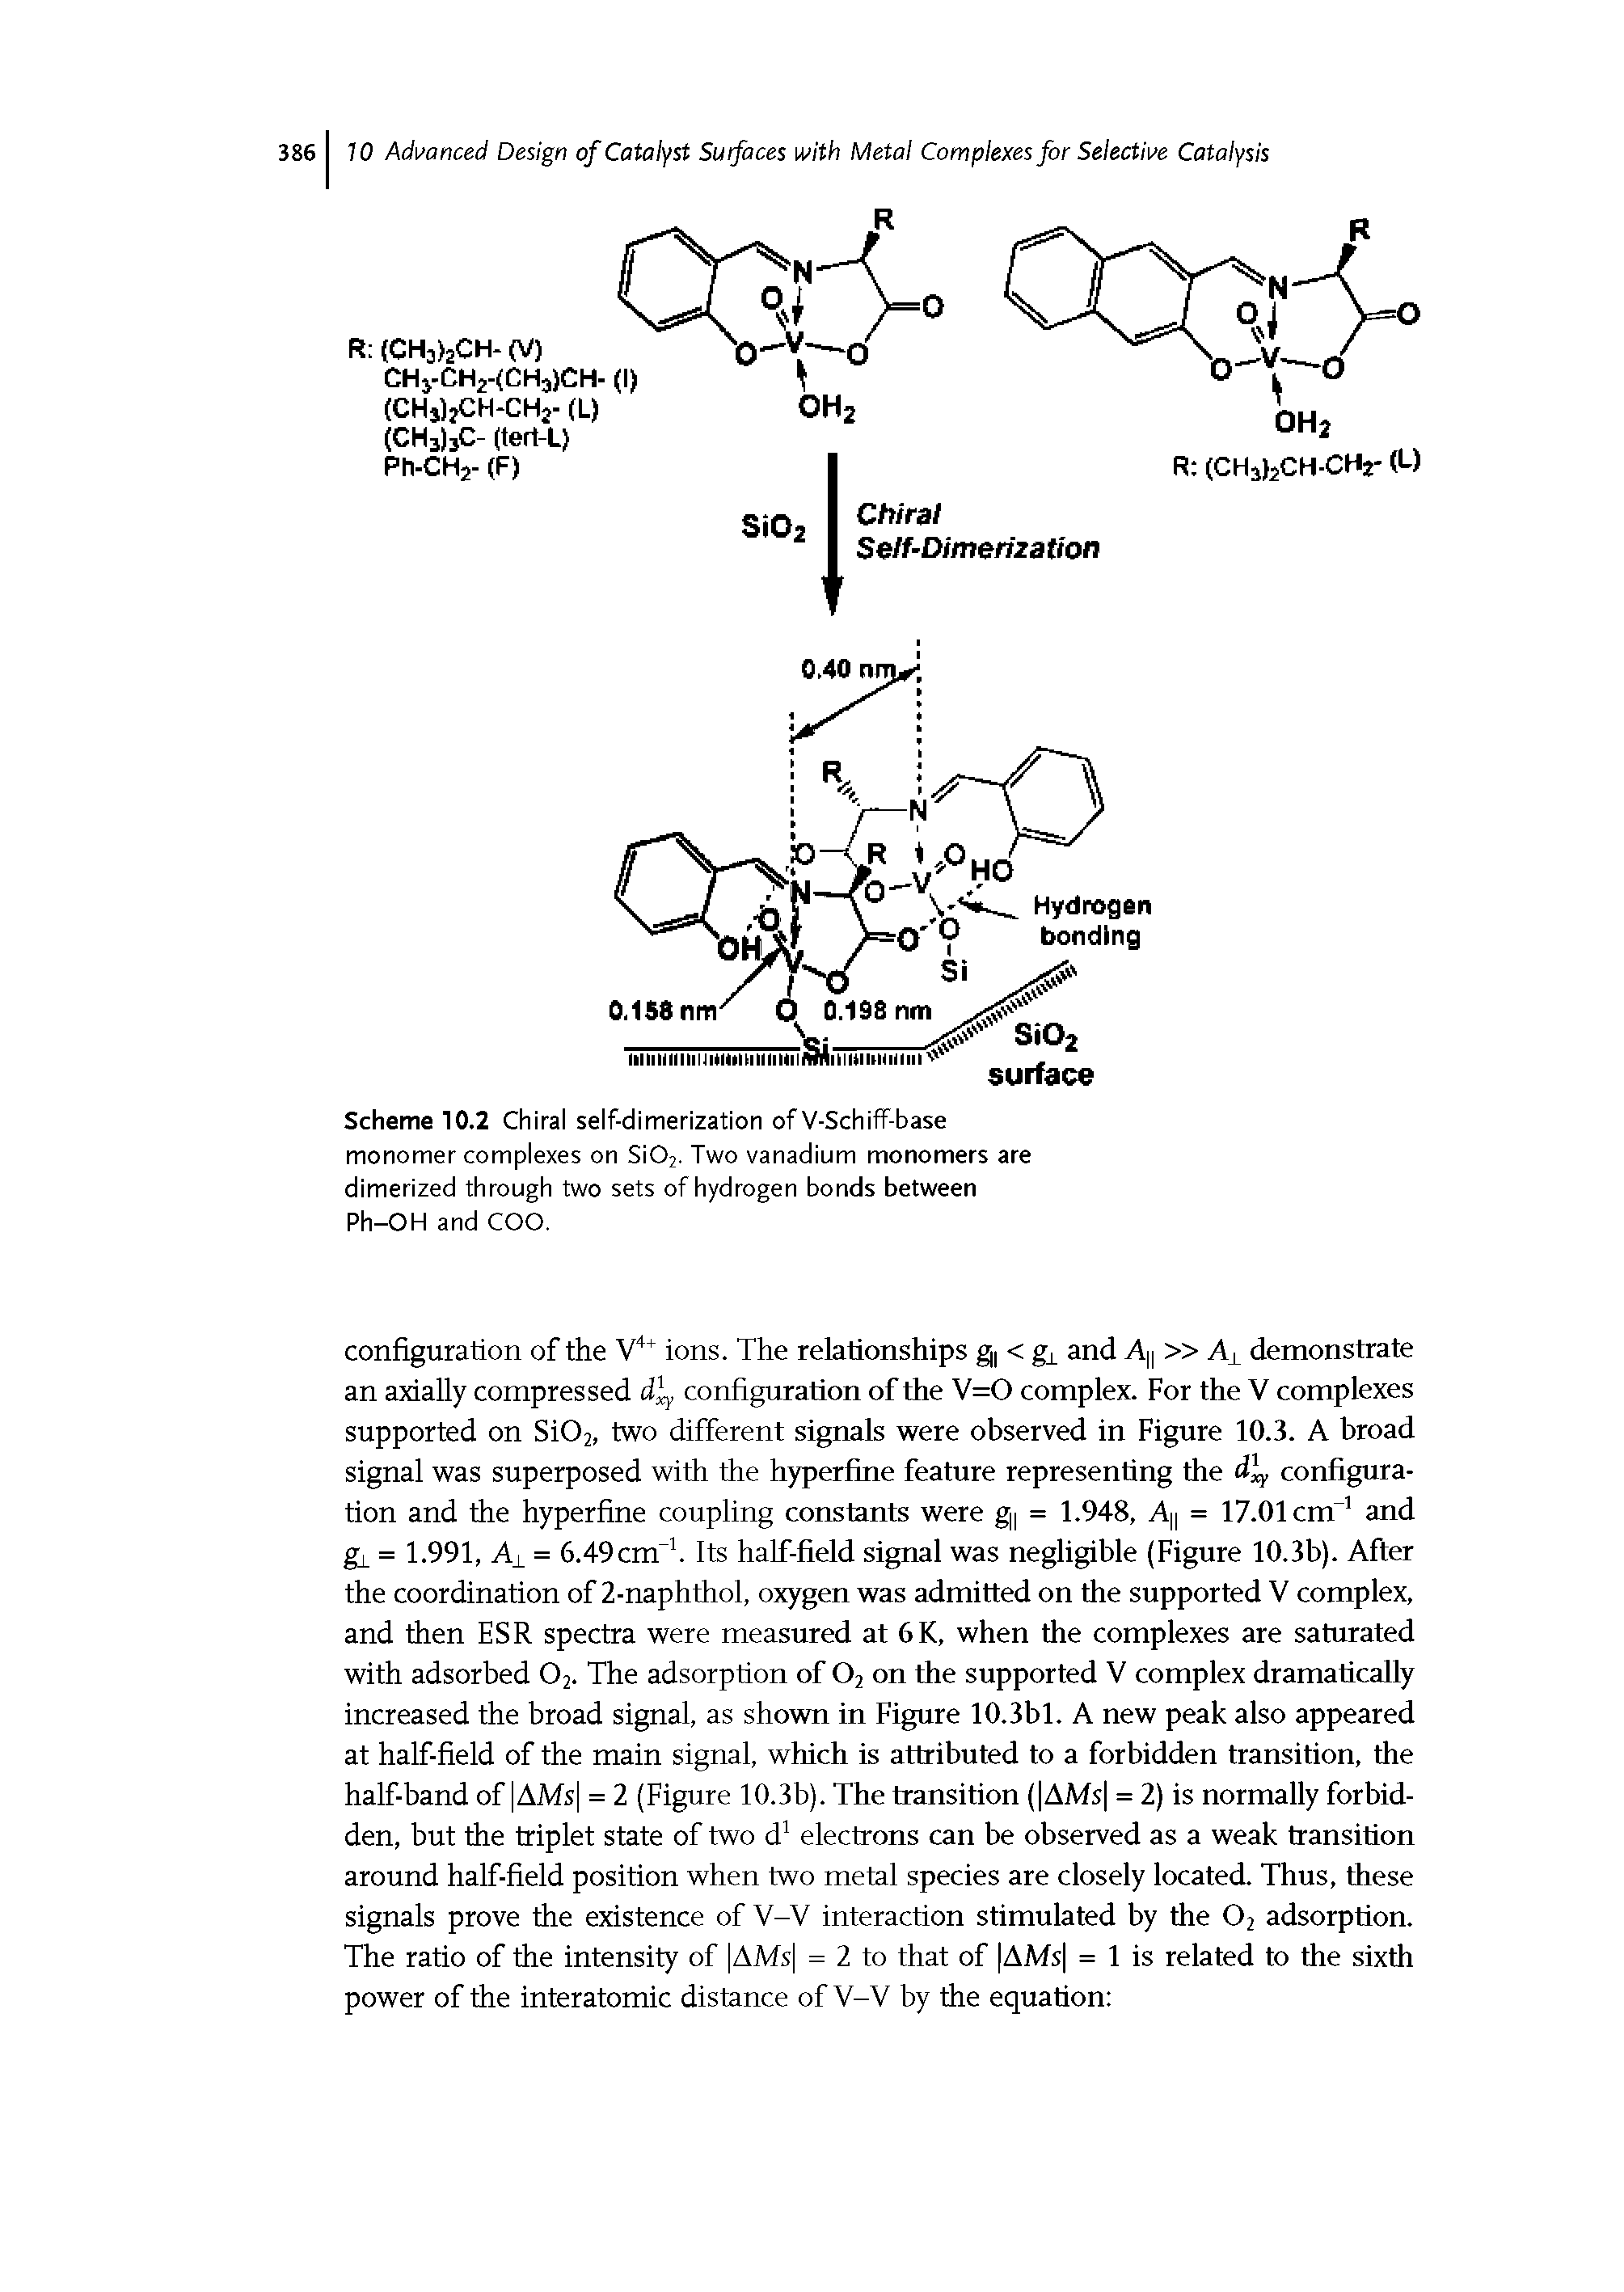 Scheme 10.2 Chiral self-dimerization of V-Schiff-base monomer complexes on Si02. Two vanadium monomers are dimerized through two sets of hydrogen bonds between Ph-OH and COO.